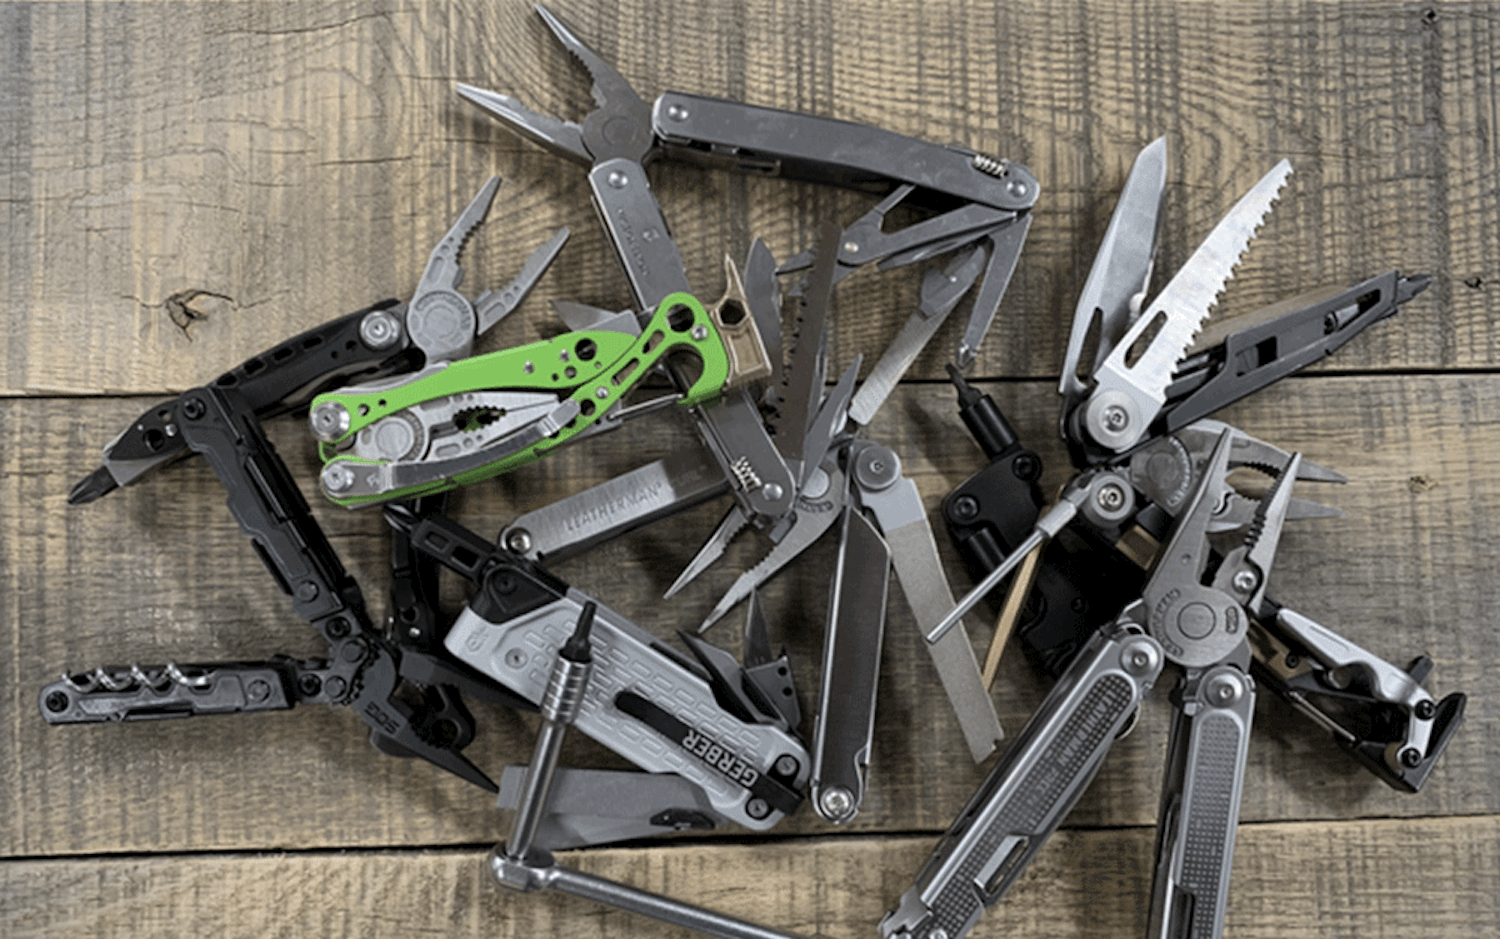 Epic One Multifunction Opener- Picking One Opens Up A Variety